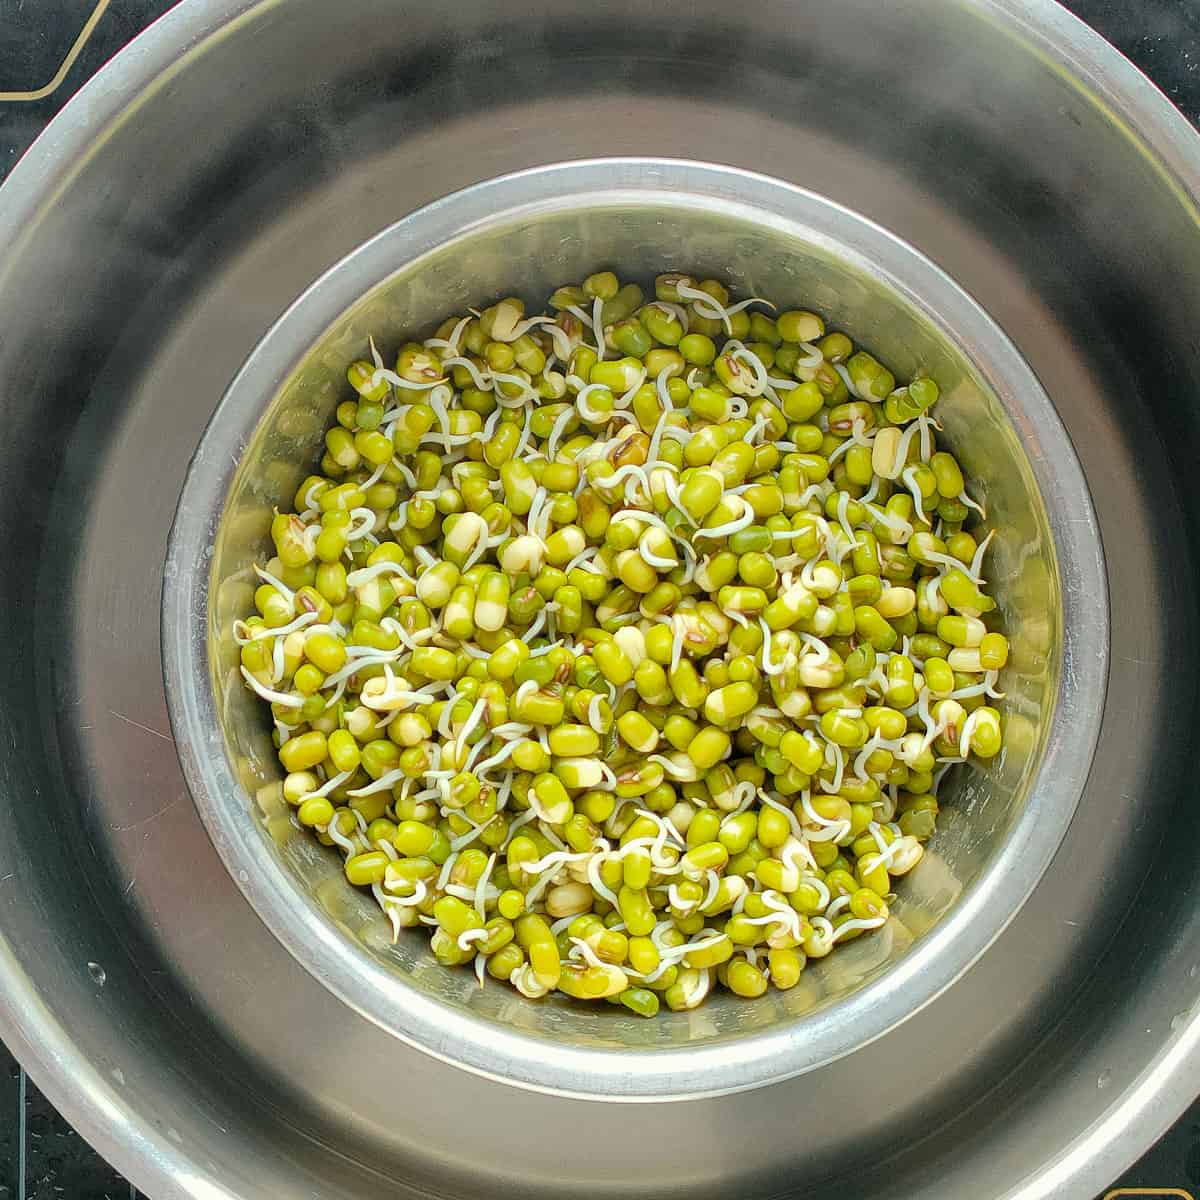 Steamed mung bean sprouts in a metal bowl.